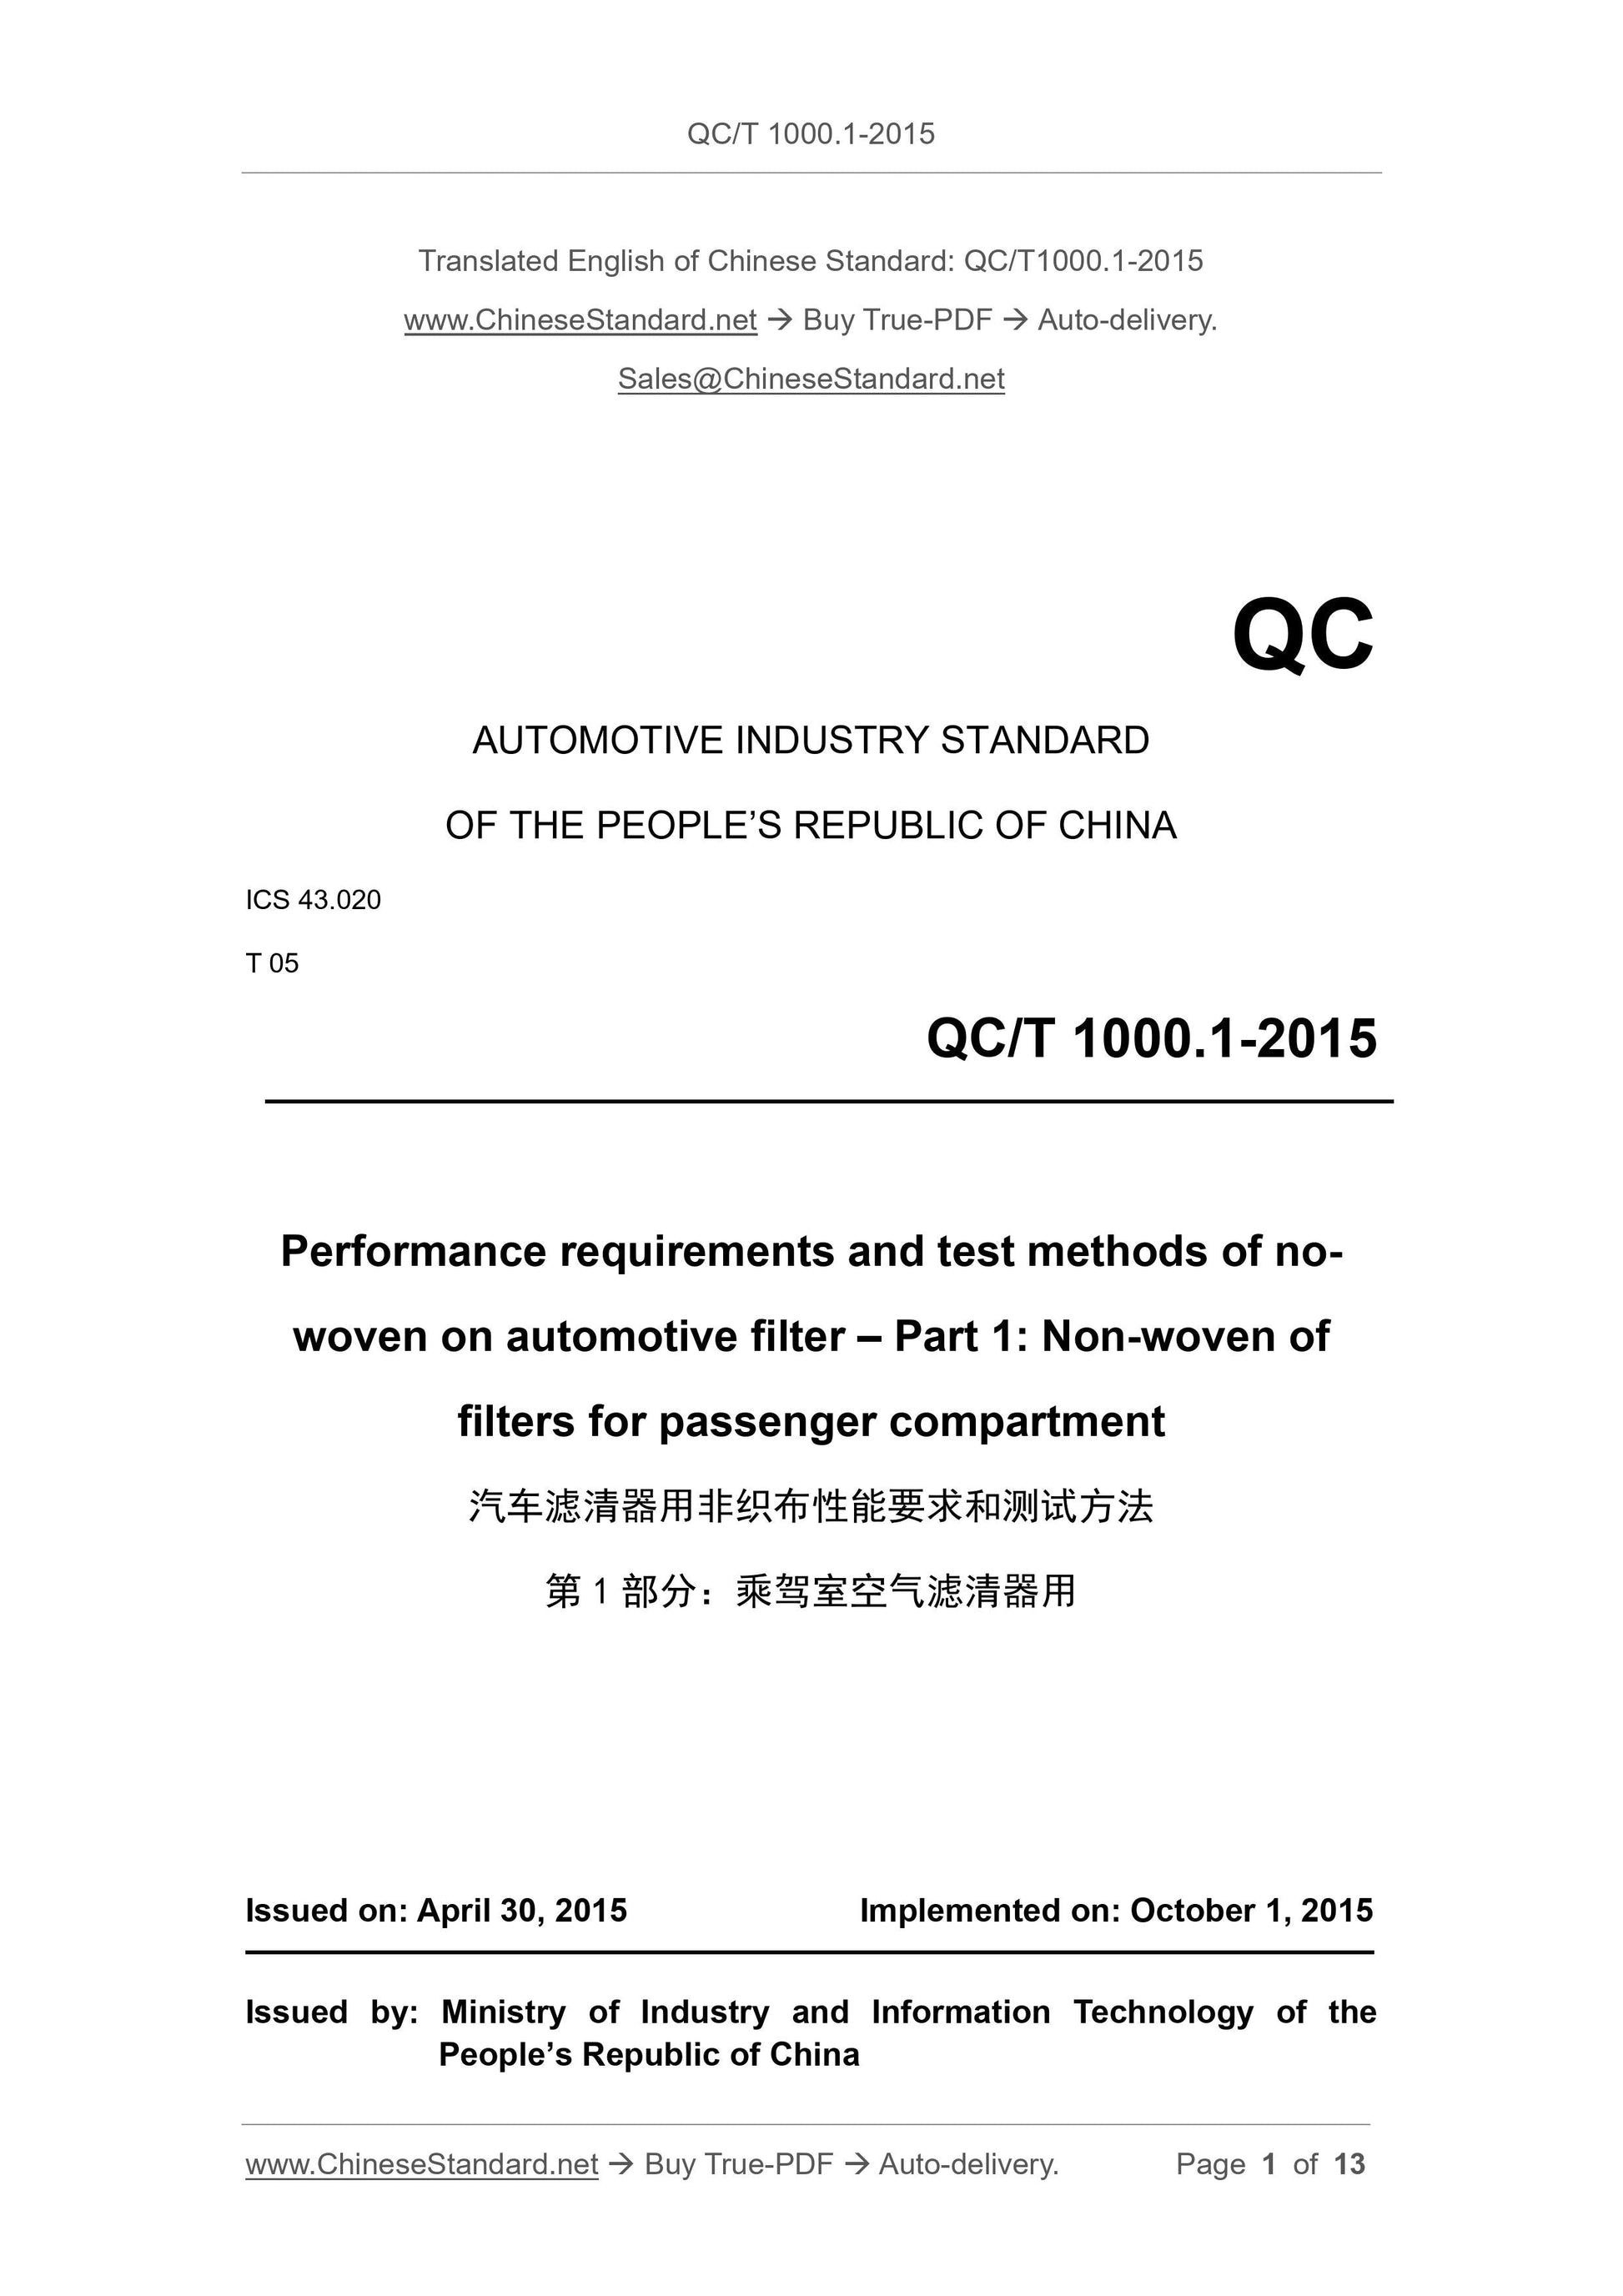 QC/T 1000.1-2015 Page 1